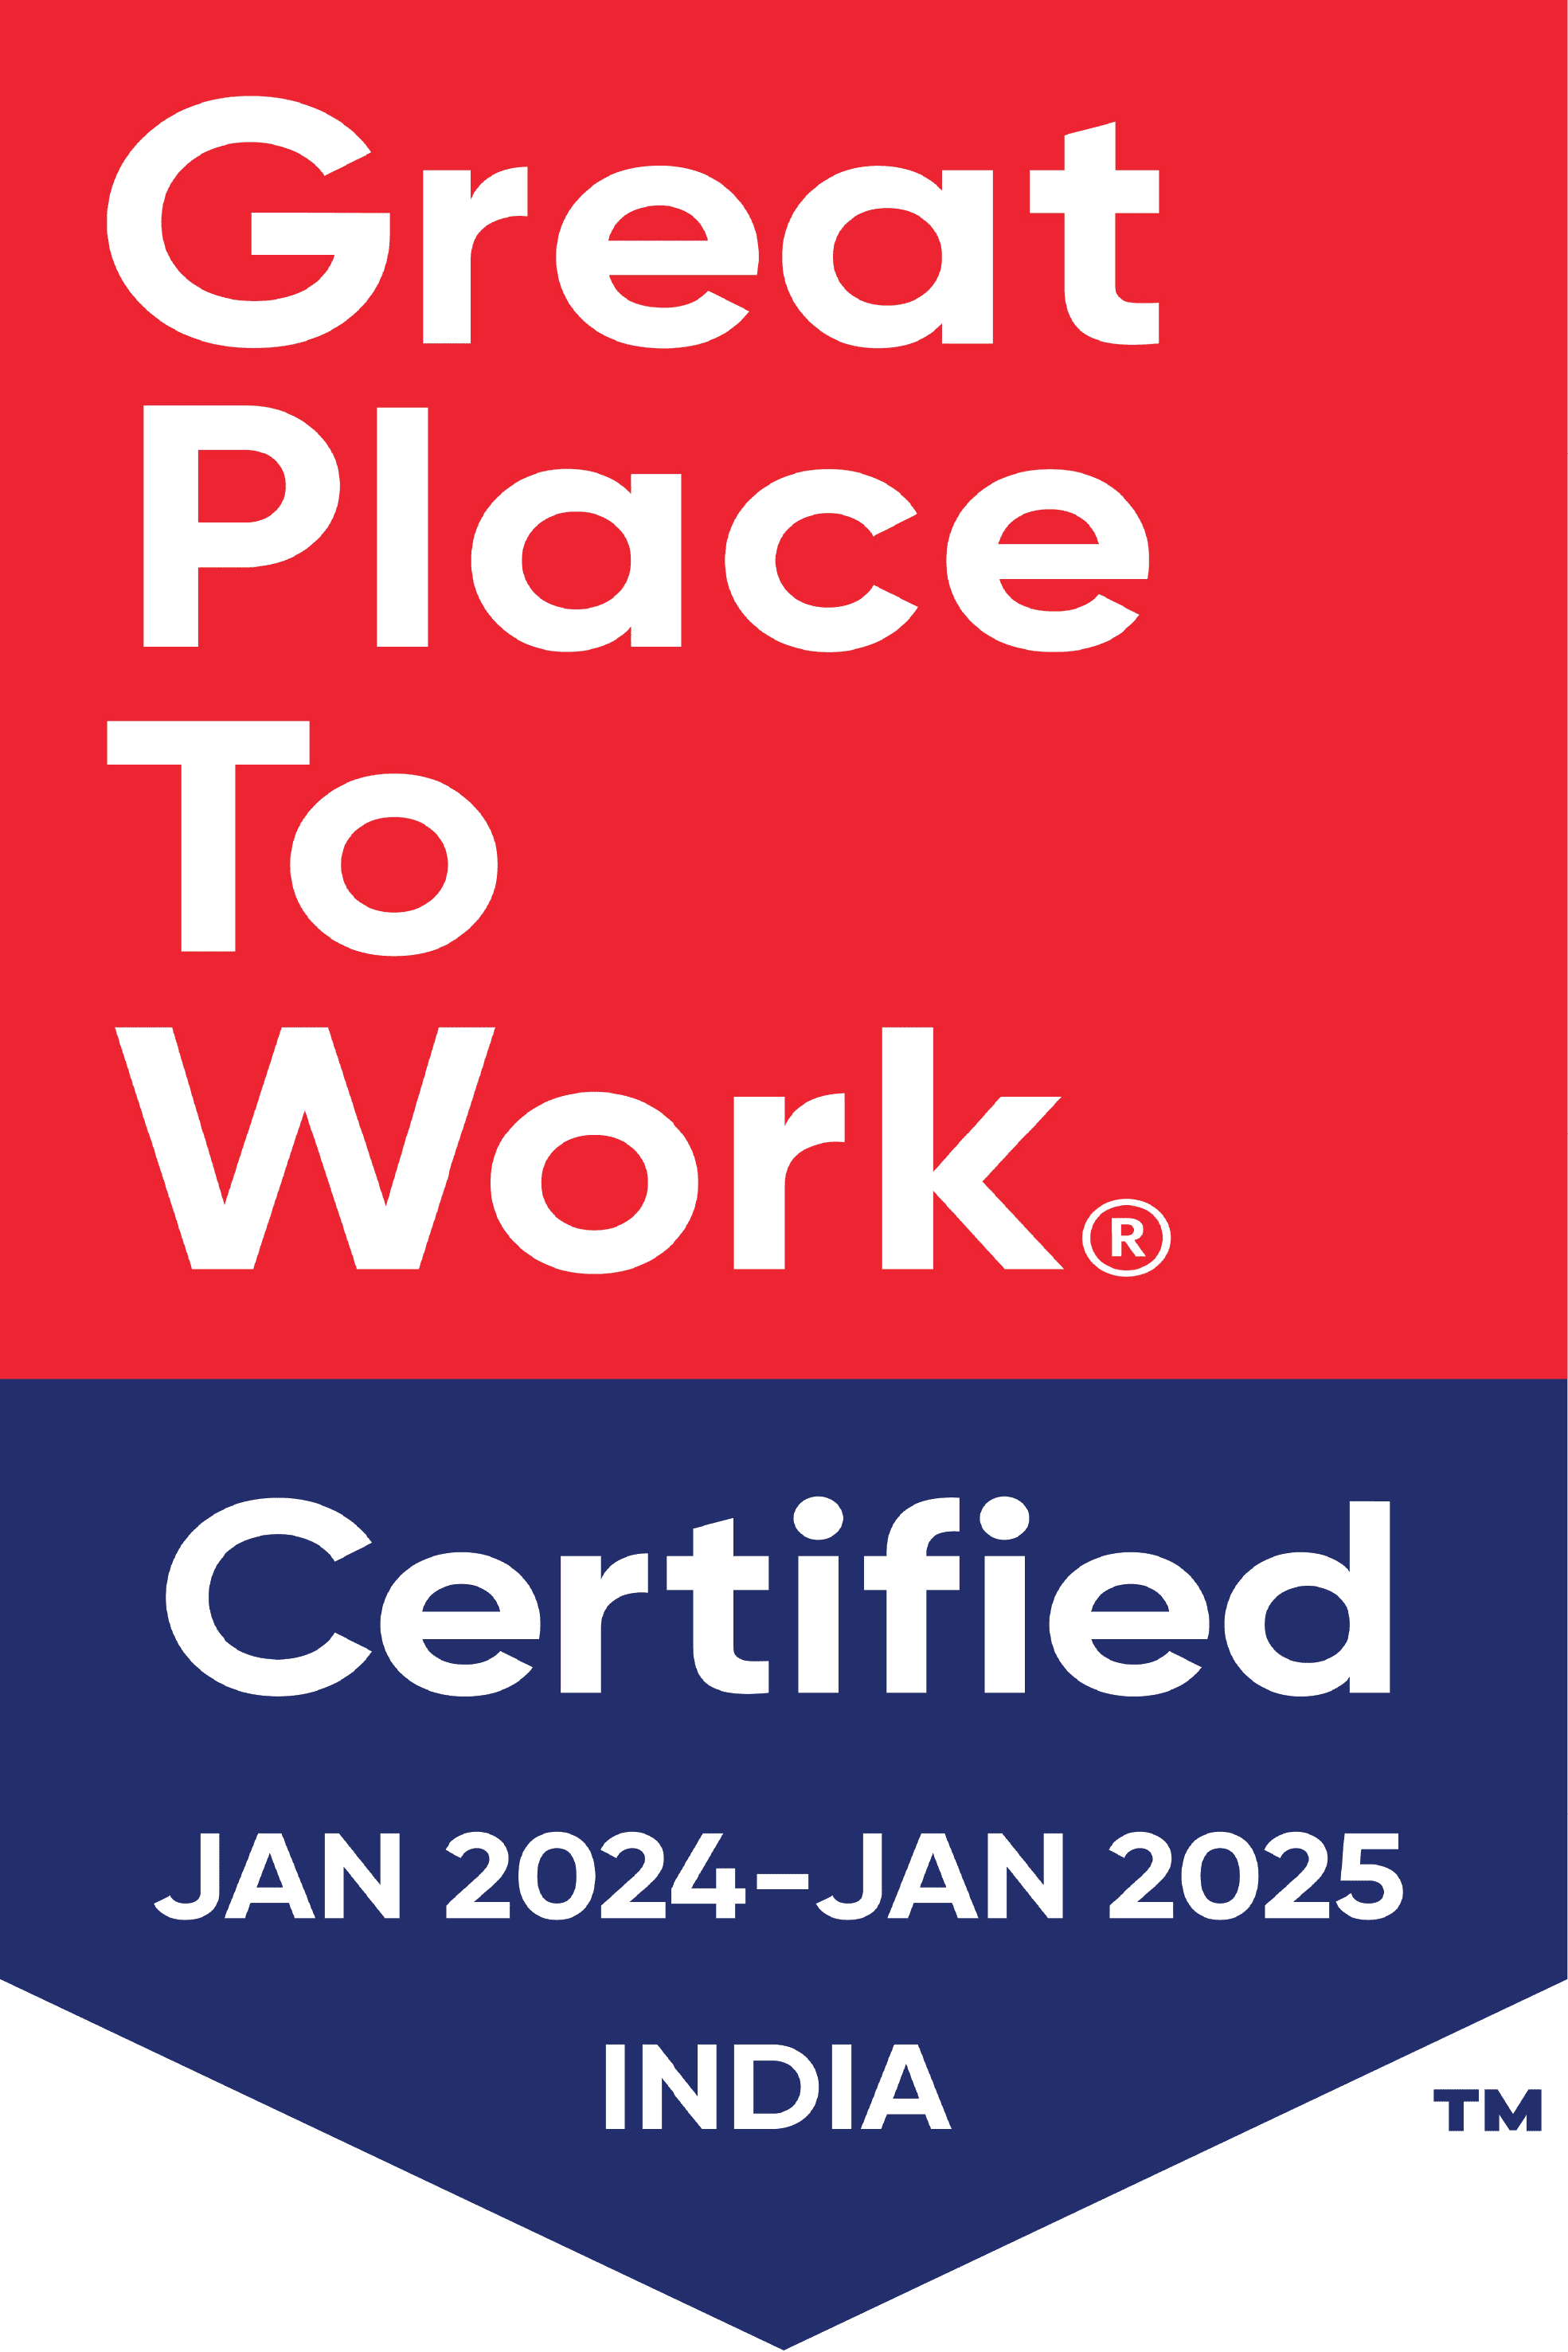 Great place to work Certified